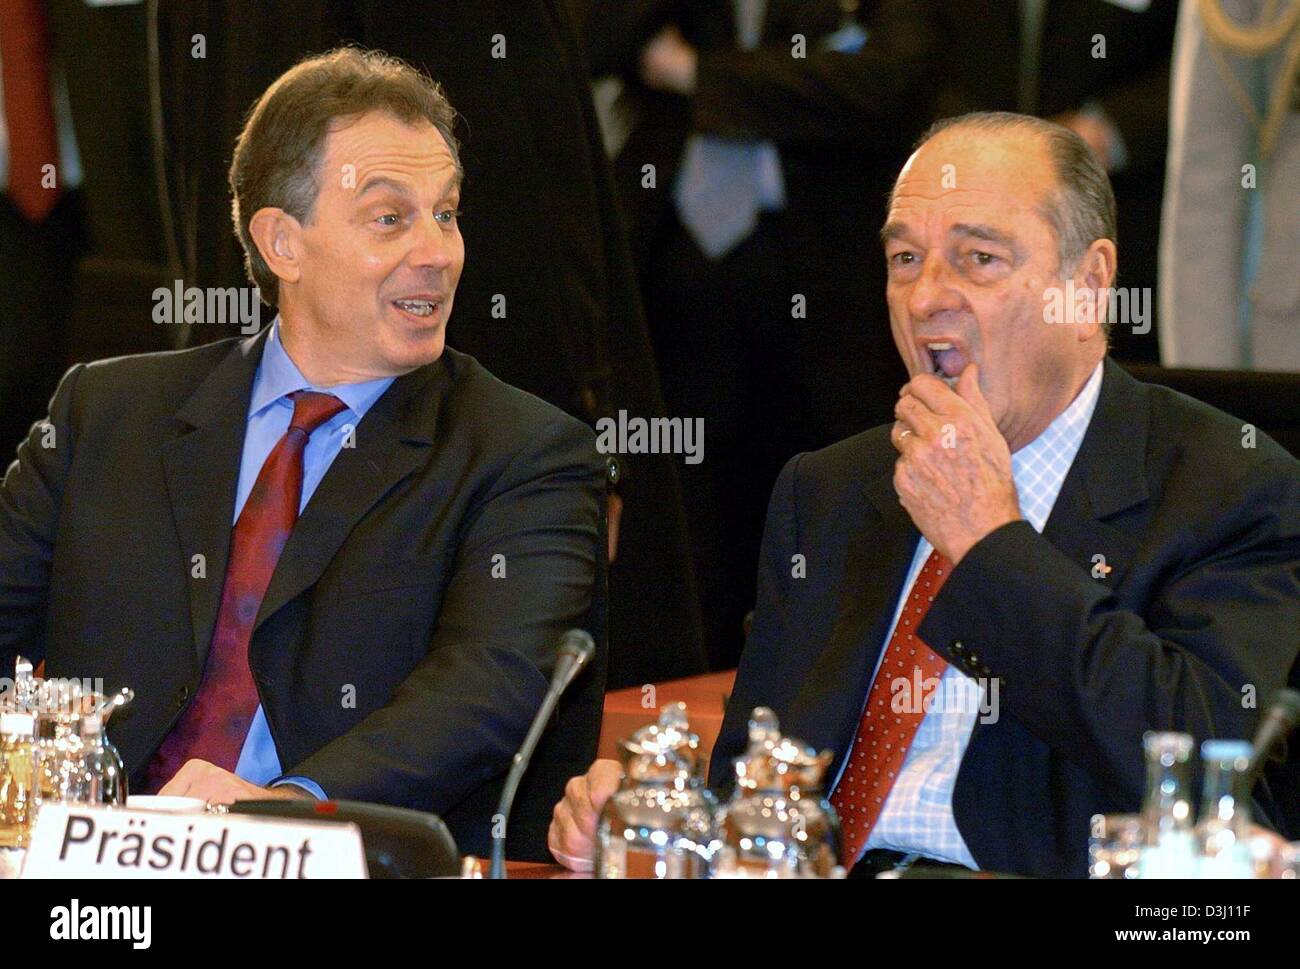 (dpa) - British Prime Minister Tony Blair (L) and French President Jacques Chirac (R) chat ahead of the EU 'Big Three' summit in Berlin, 18 February 2004. Apart from discussing future moves in the European Union, the three leaders from Germany, Britain and France hope to lay aside divisions caused by the Iraq war and to talk up Europe's fragile economy. The one-day summit hosted by Stock Photo